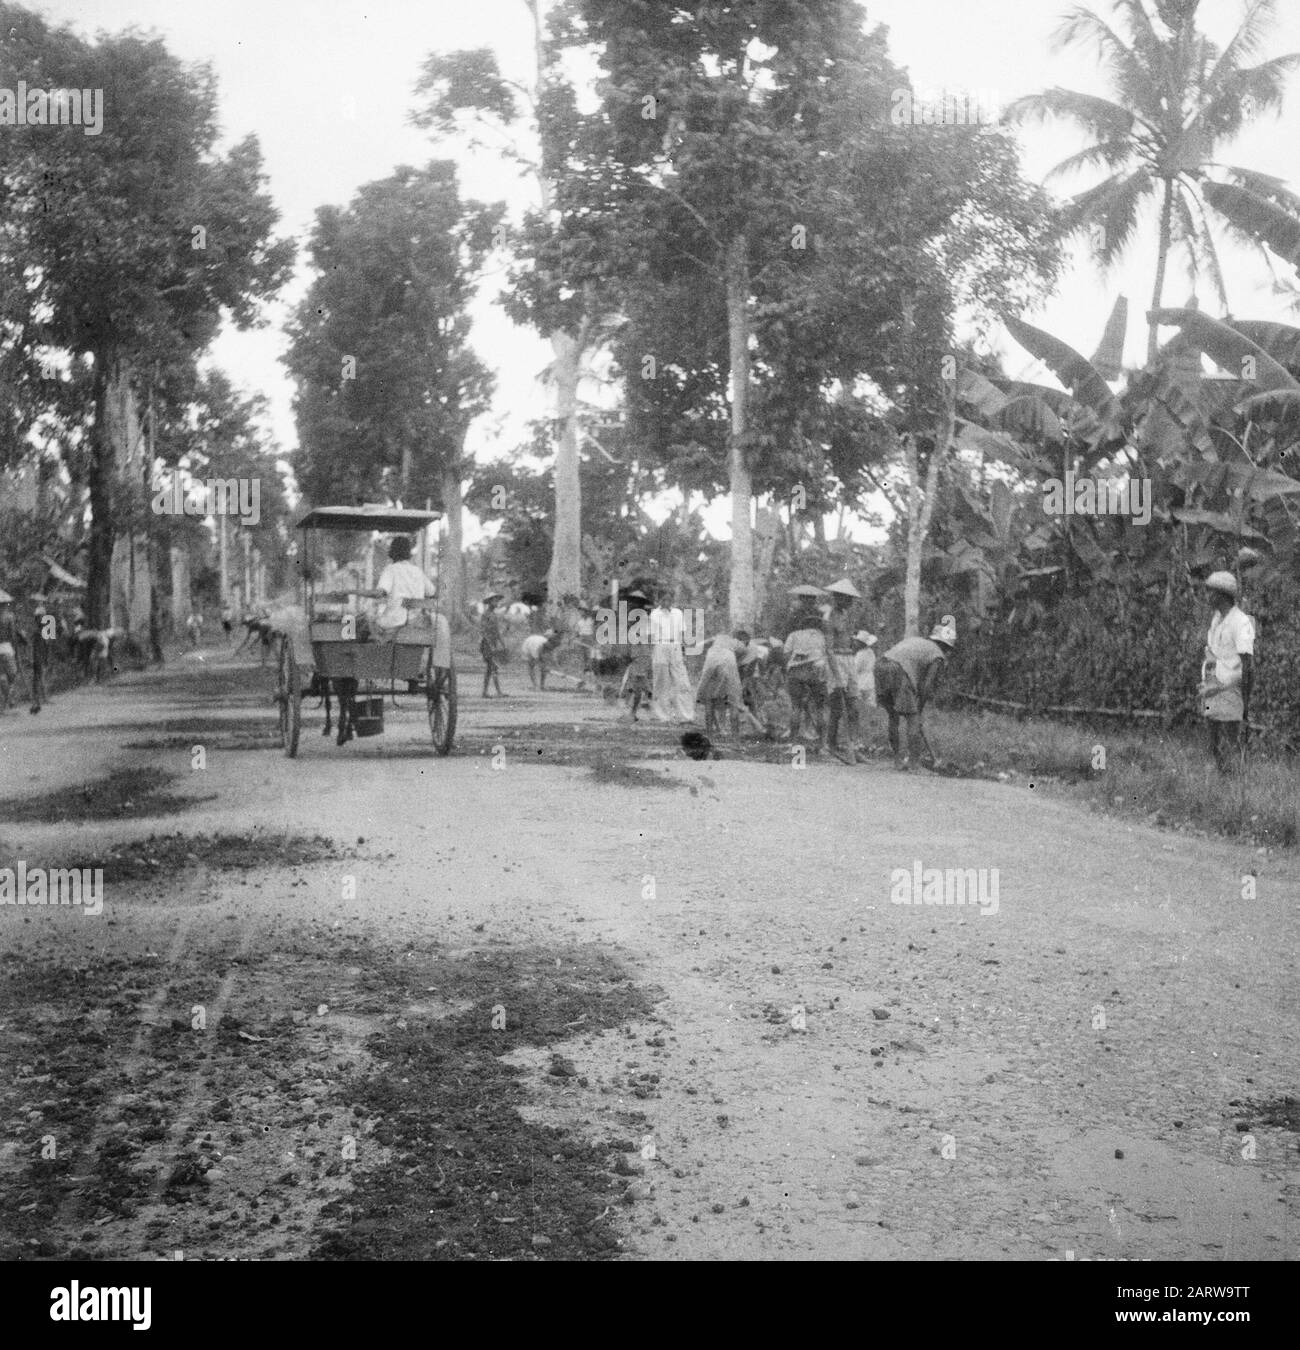 Magelang and surroundings  [street image. A road is cleaned or repaired. A dokar is driving by road] Date: February 13, 1949 Location: Indonesia, Dutch East Indies Stock Photo